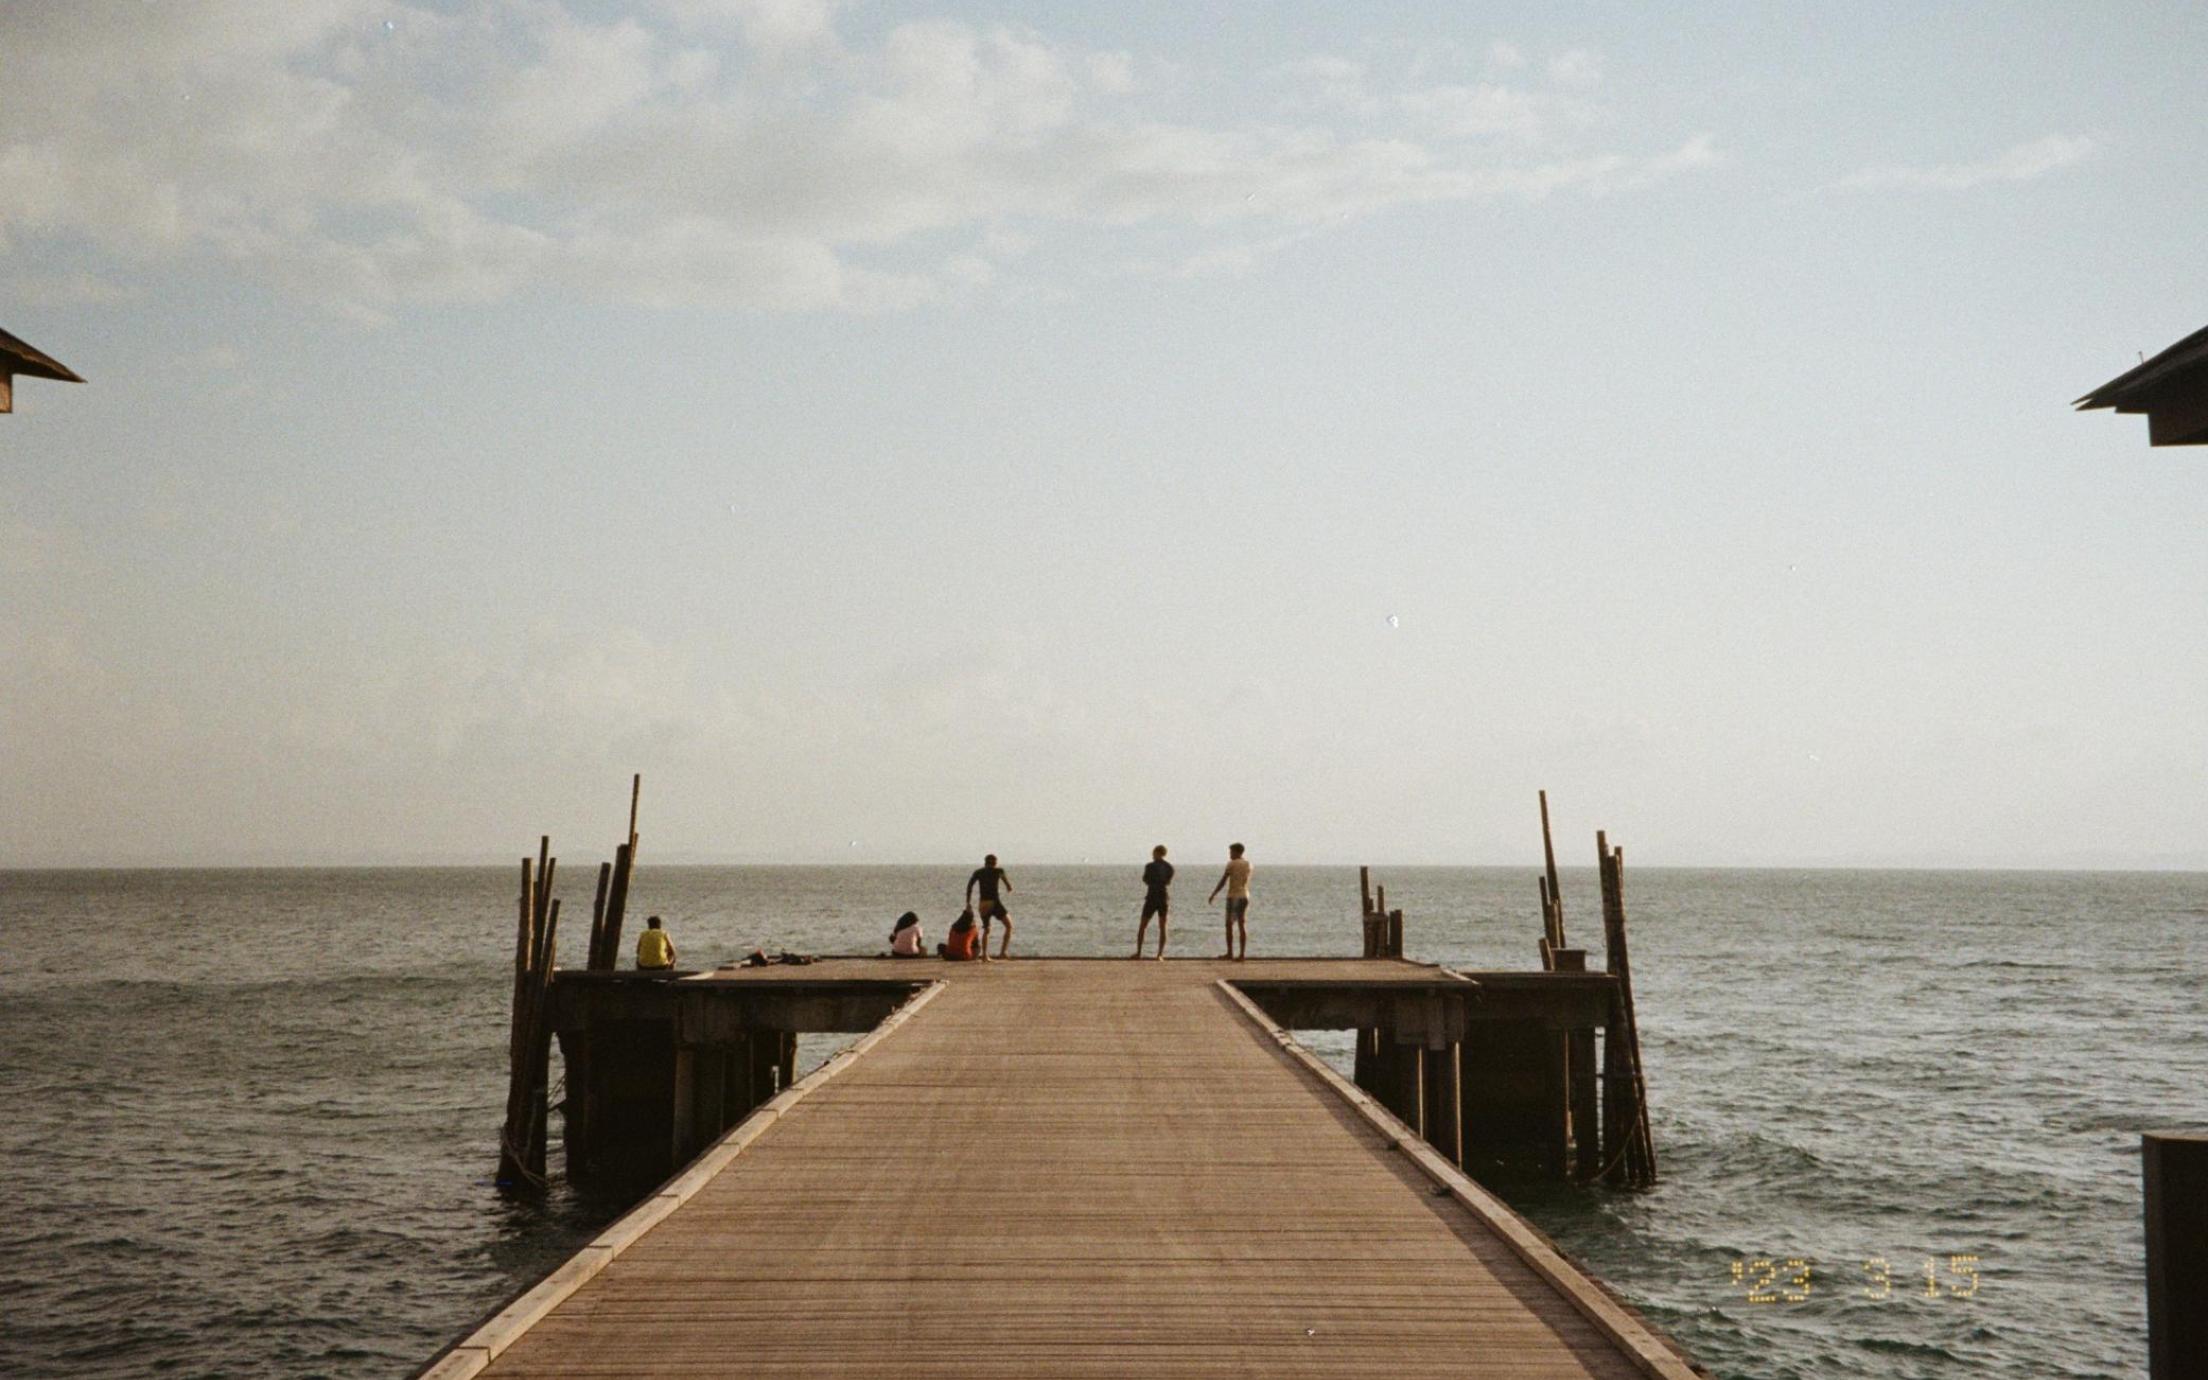 A dock with people on it, ocean behind